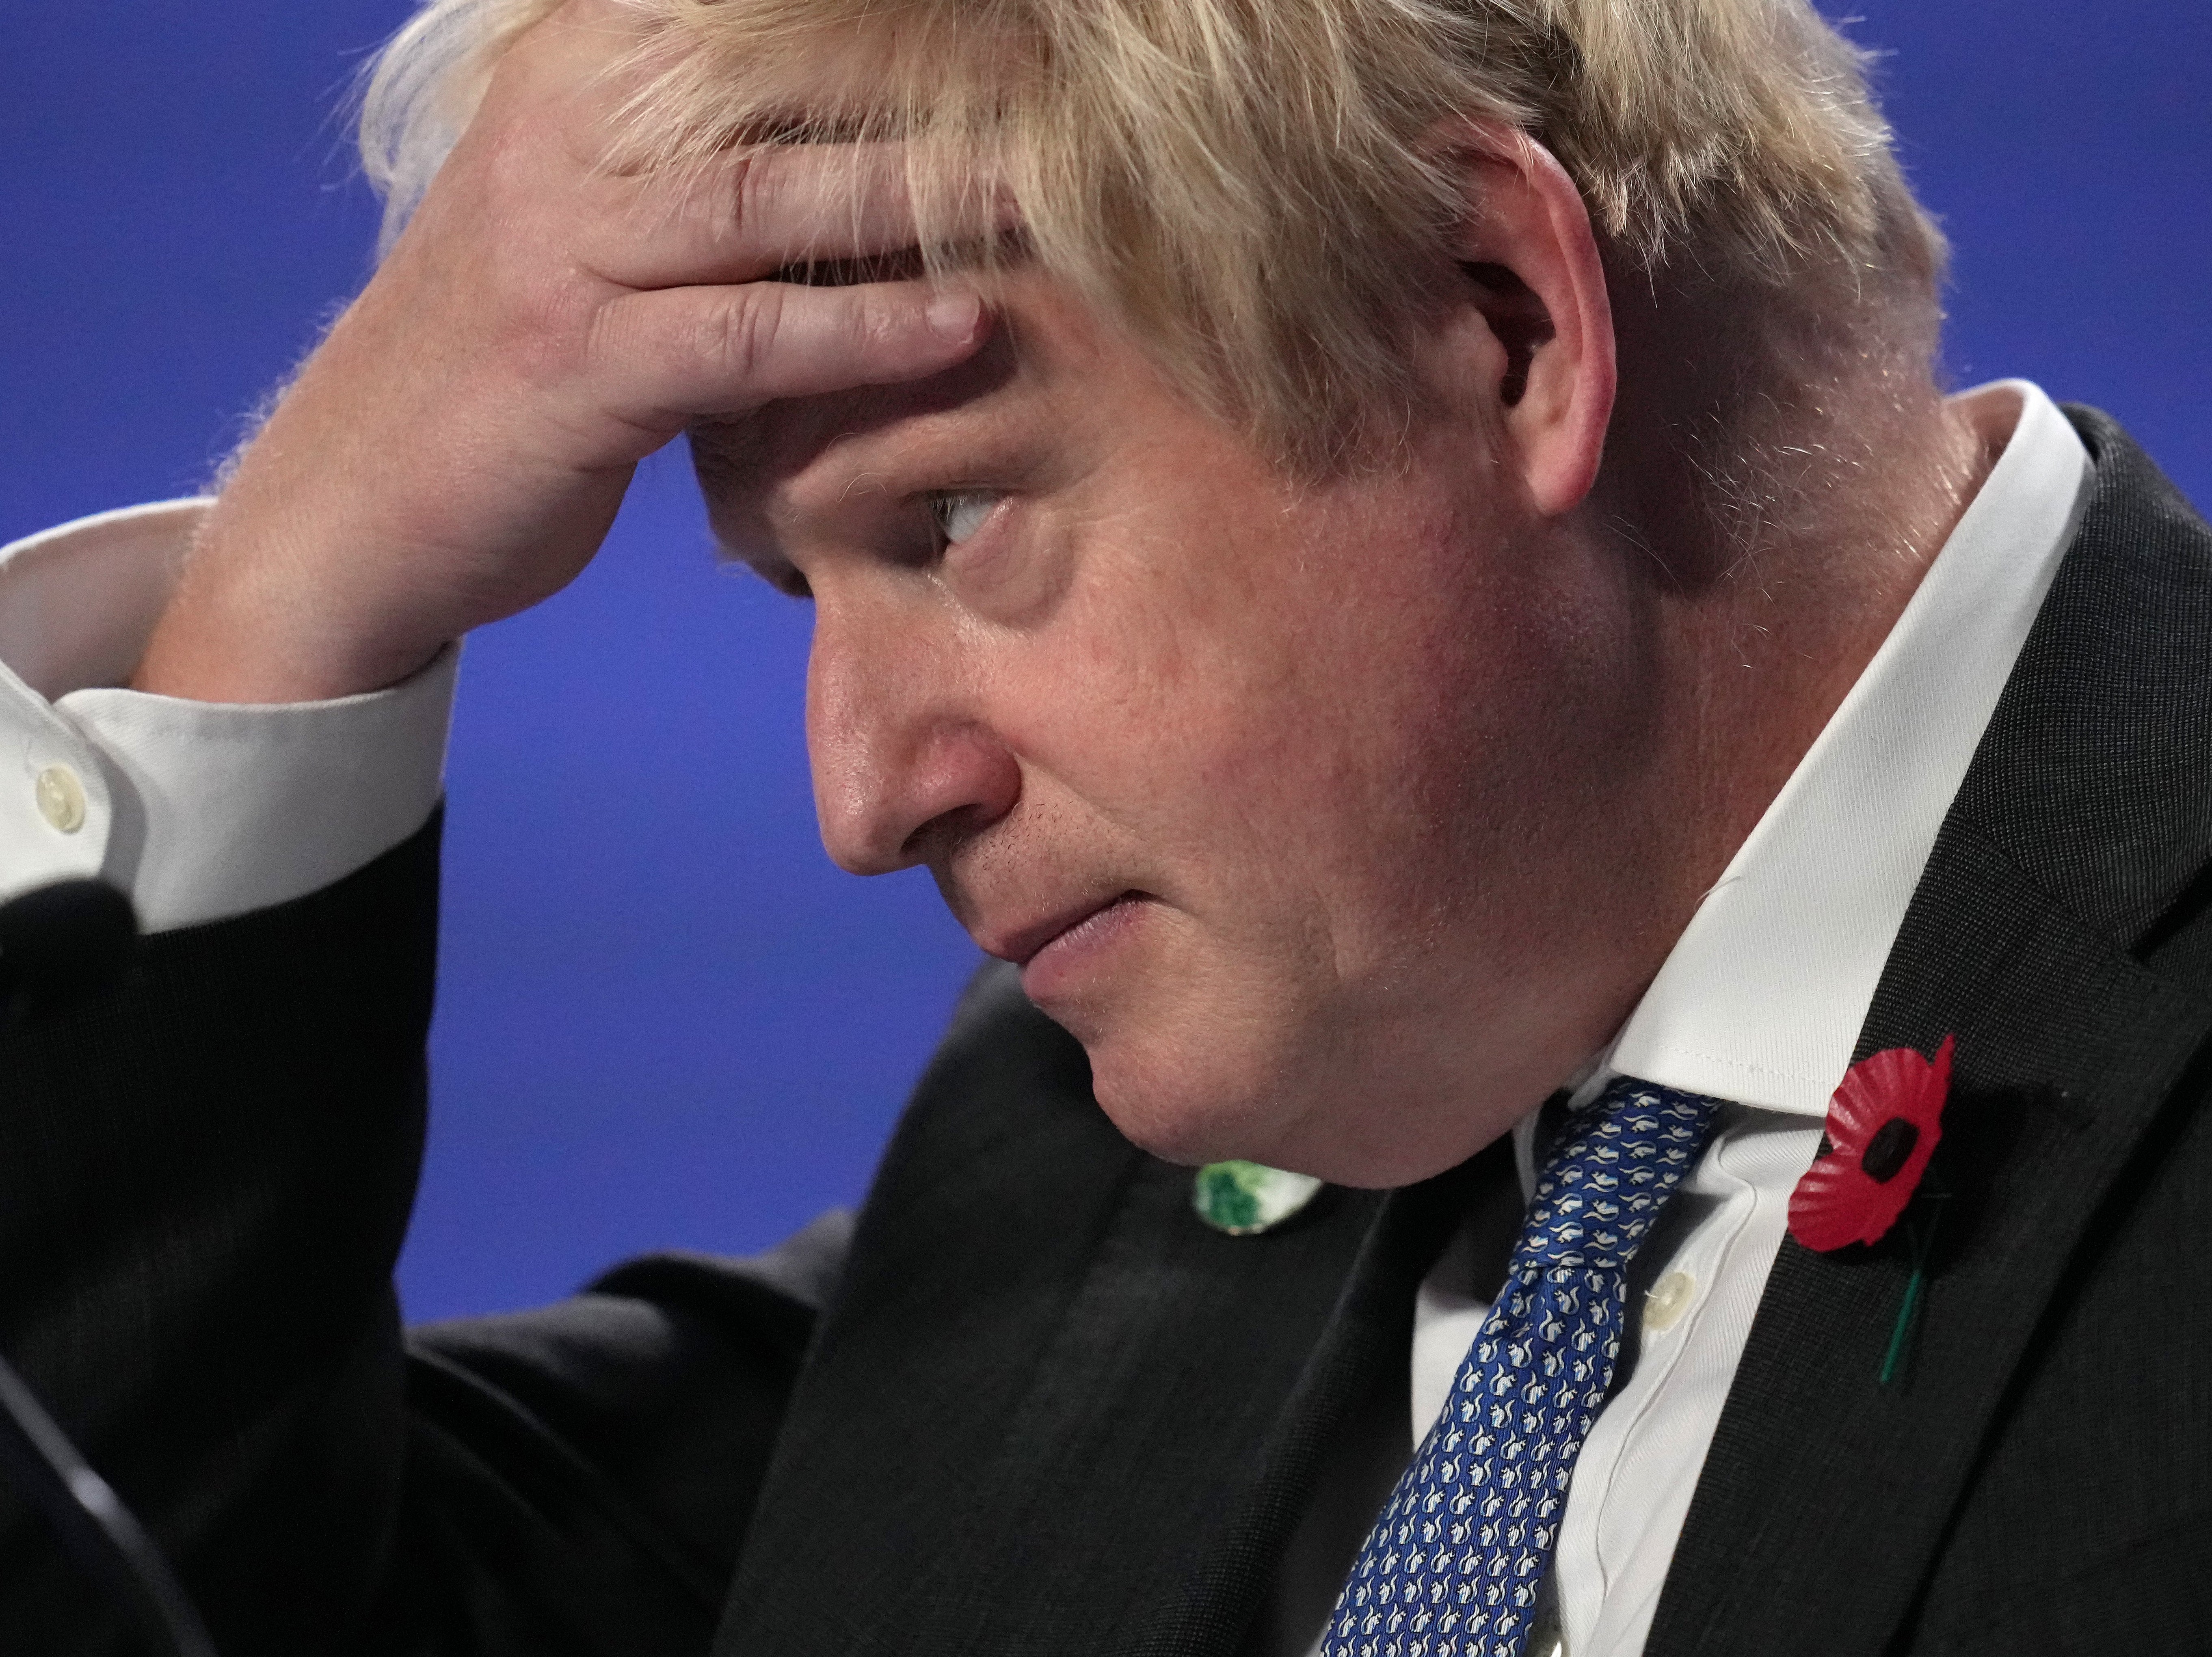 Boris Johnson’s handling of the Owen Paterson sleaze row has been widely criticised